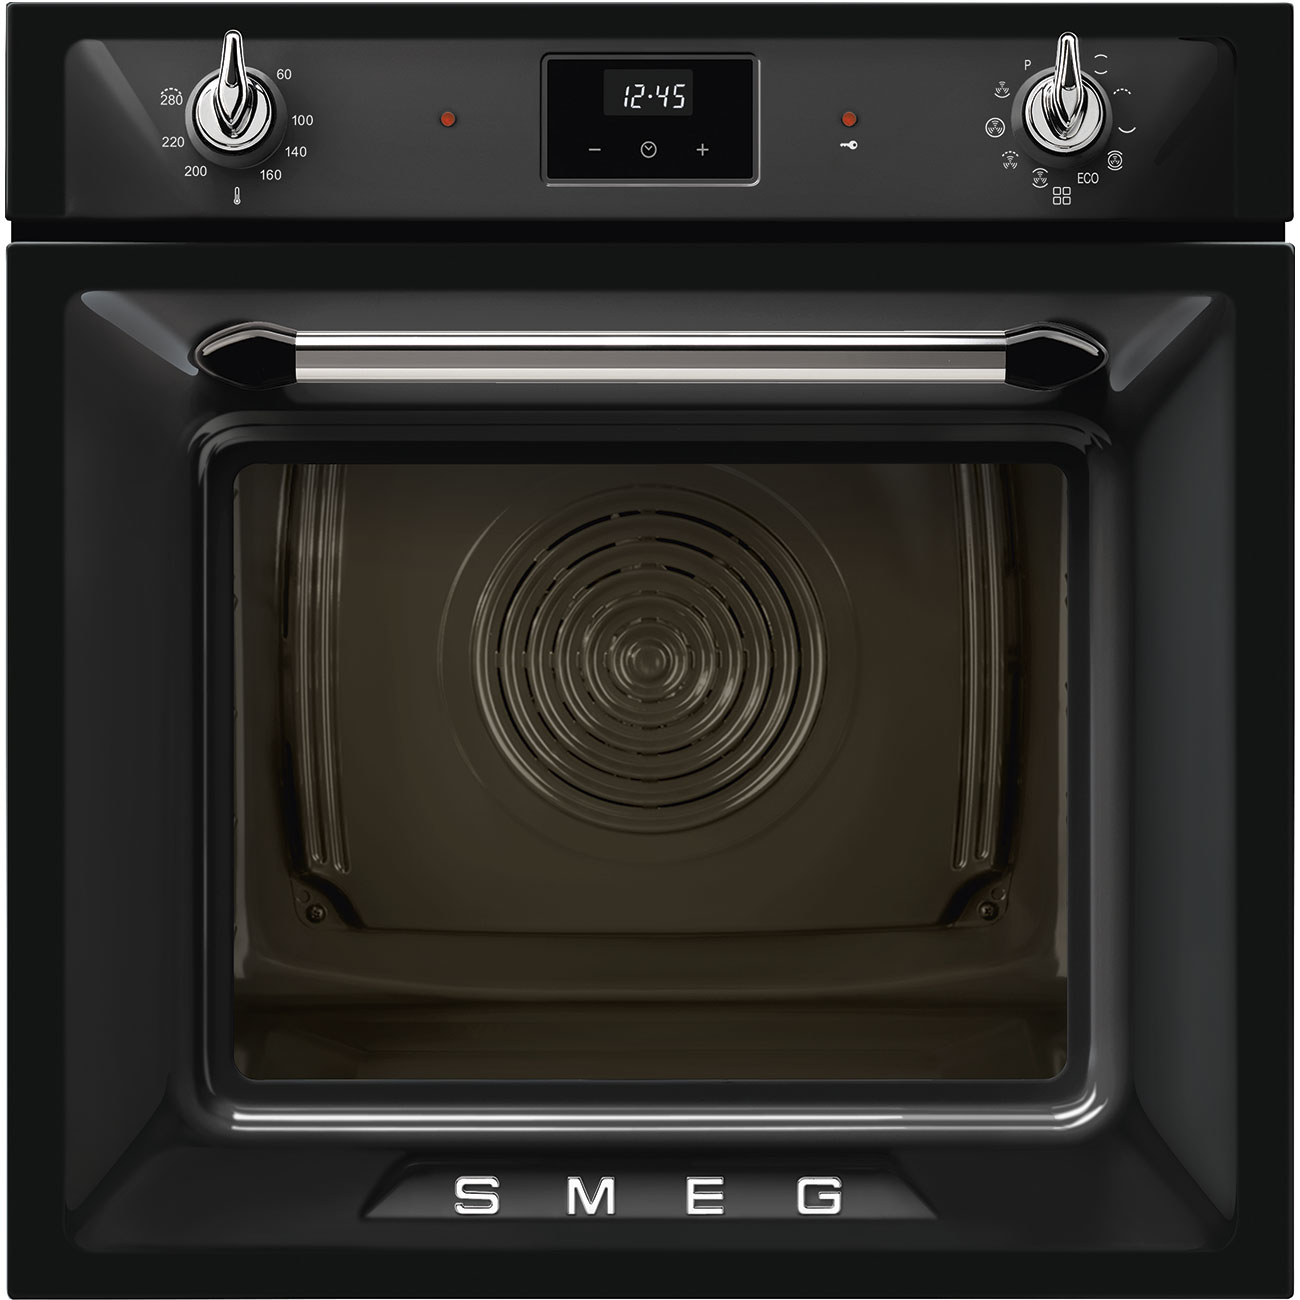 Black Traditional pyro Galileo Oven.  60cm. Built-in. Smeg_10